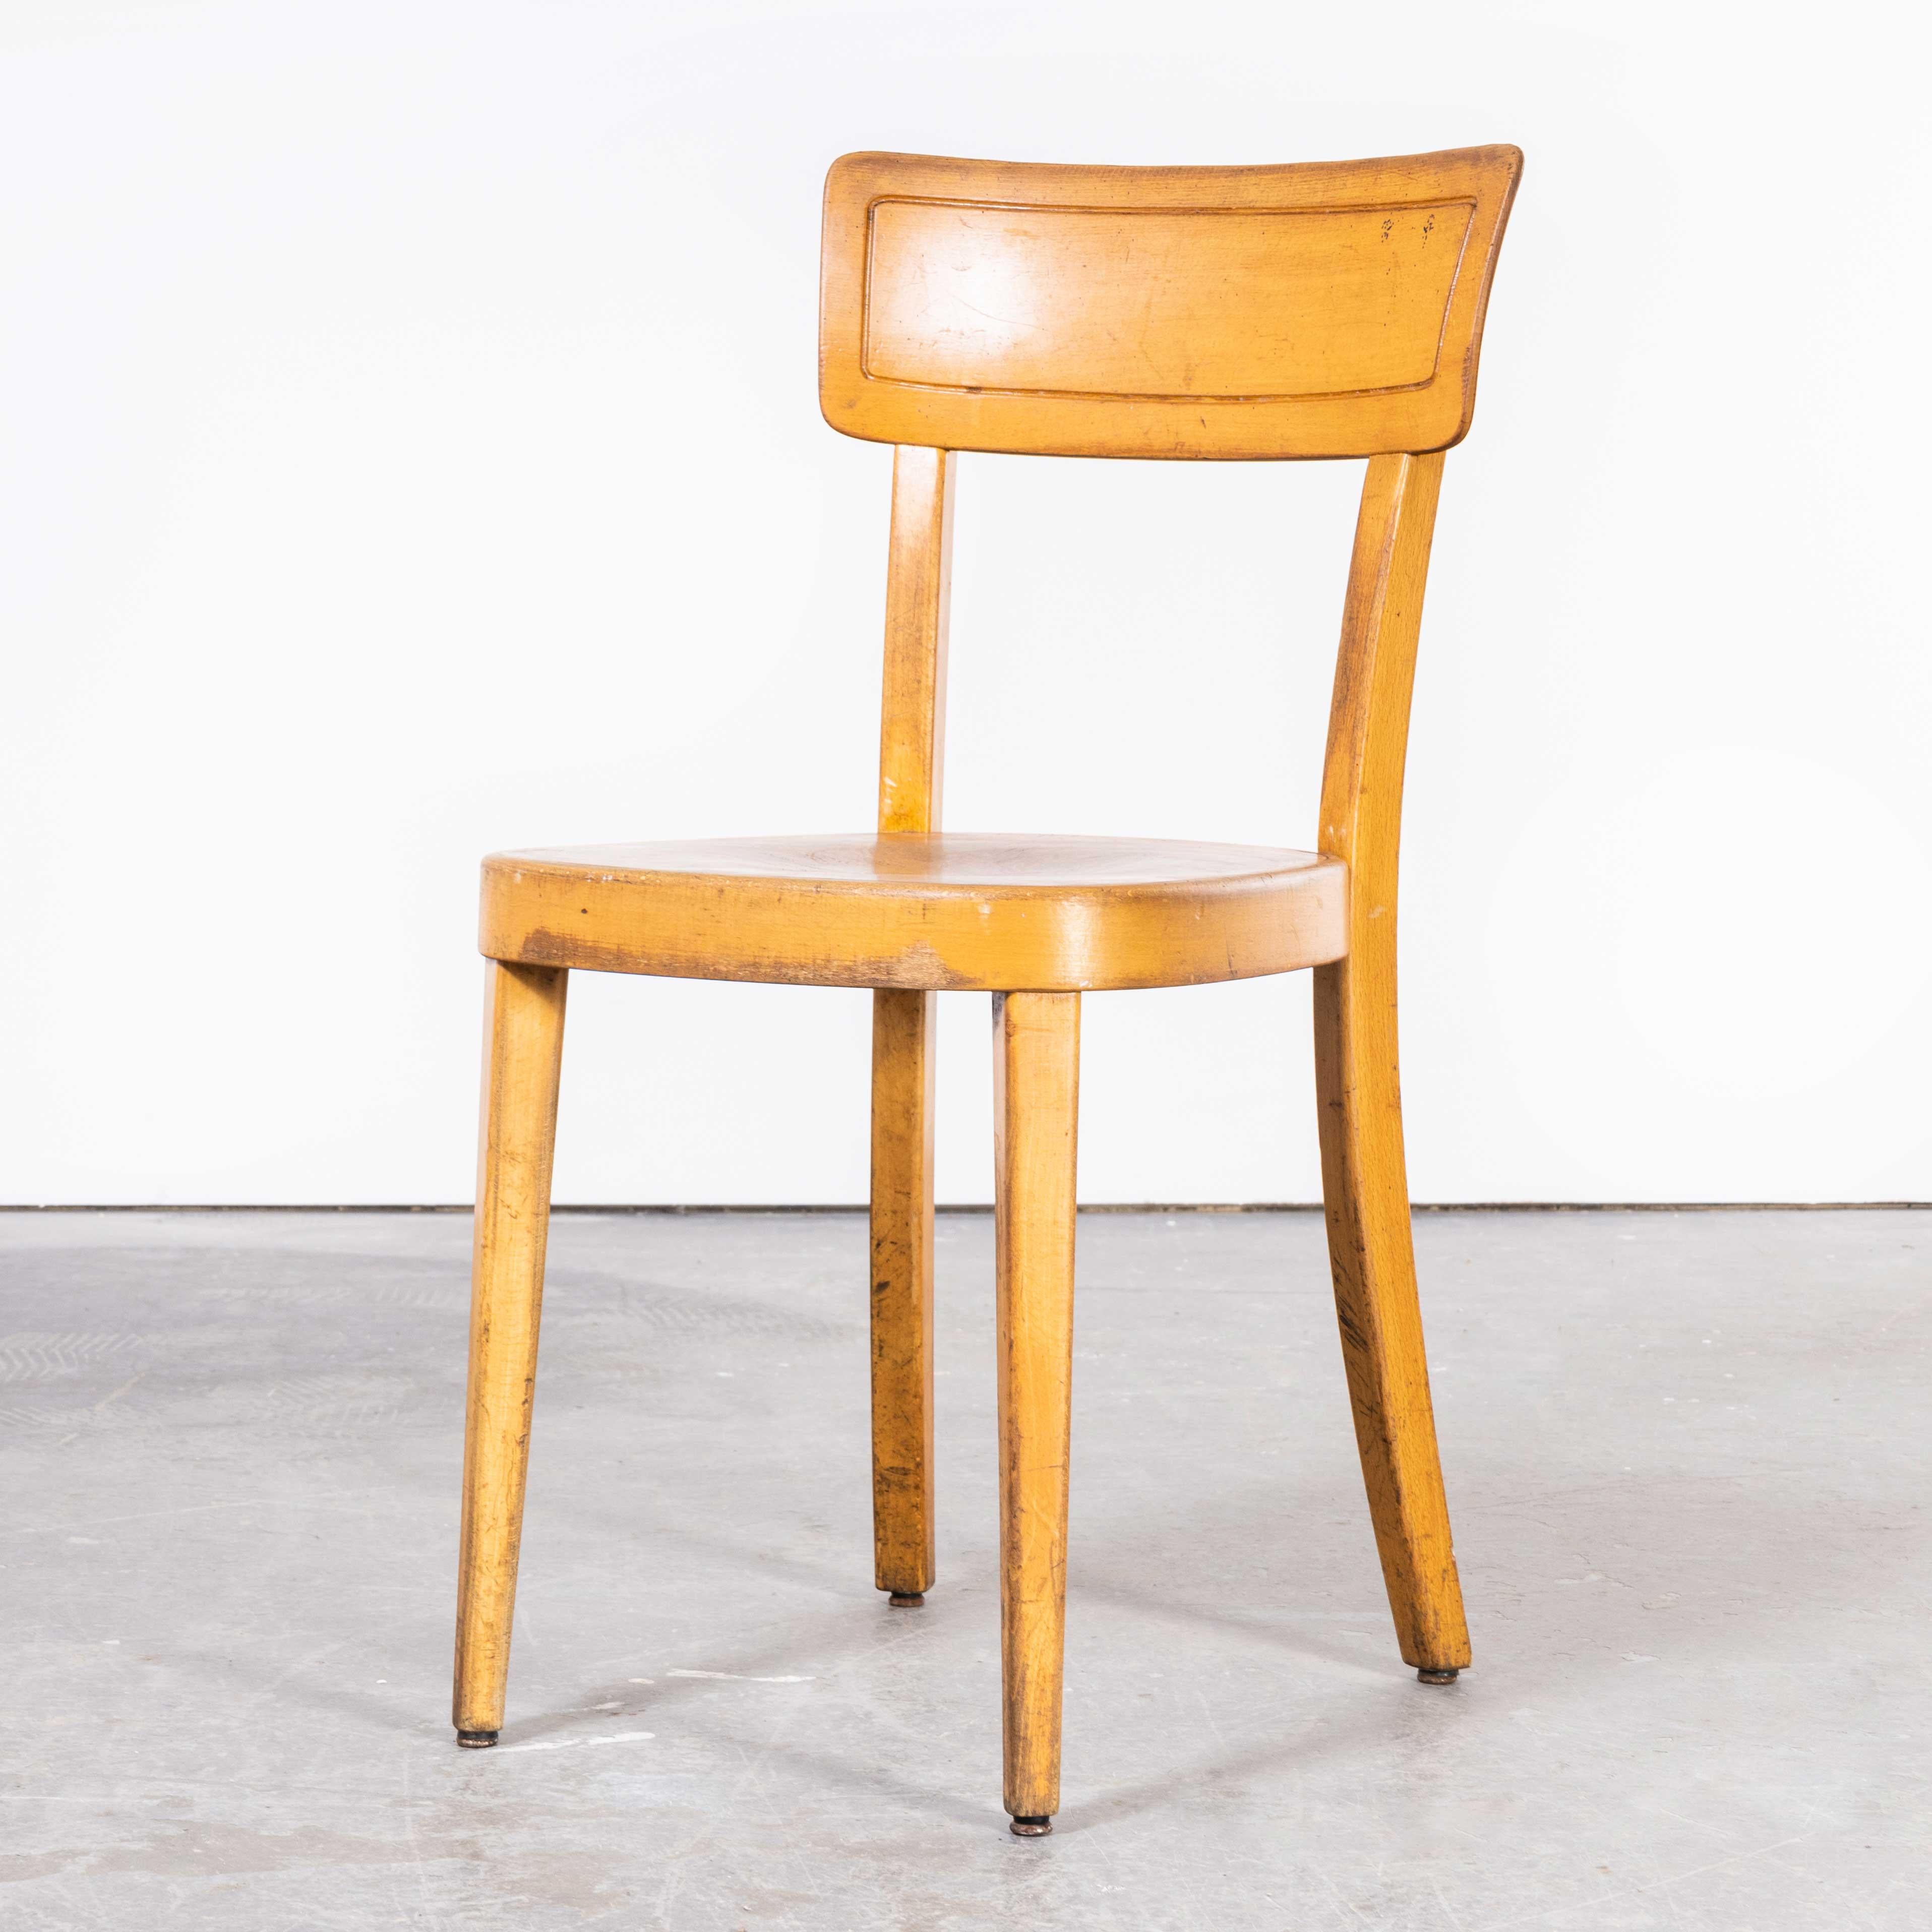 1960’s Horgen Glarus Beech Saddle Back Dining Chairs – Set Of Six
1960’s Horgen Glarus Beech Saddle Back Dining Chairs – Set Of Six. One of the best sets of chairs we have sourced and our first from Horgen Glarus the oldest surviving furniture